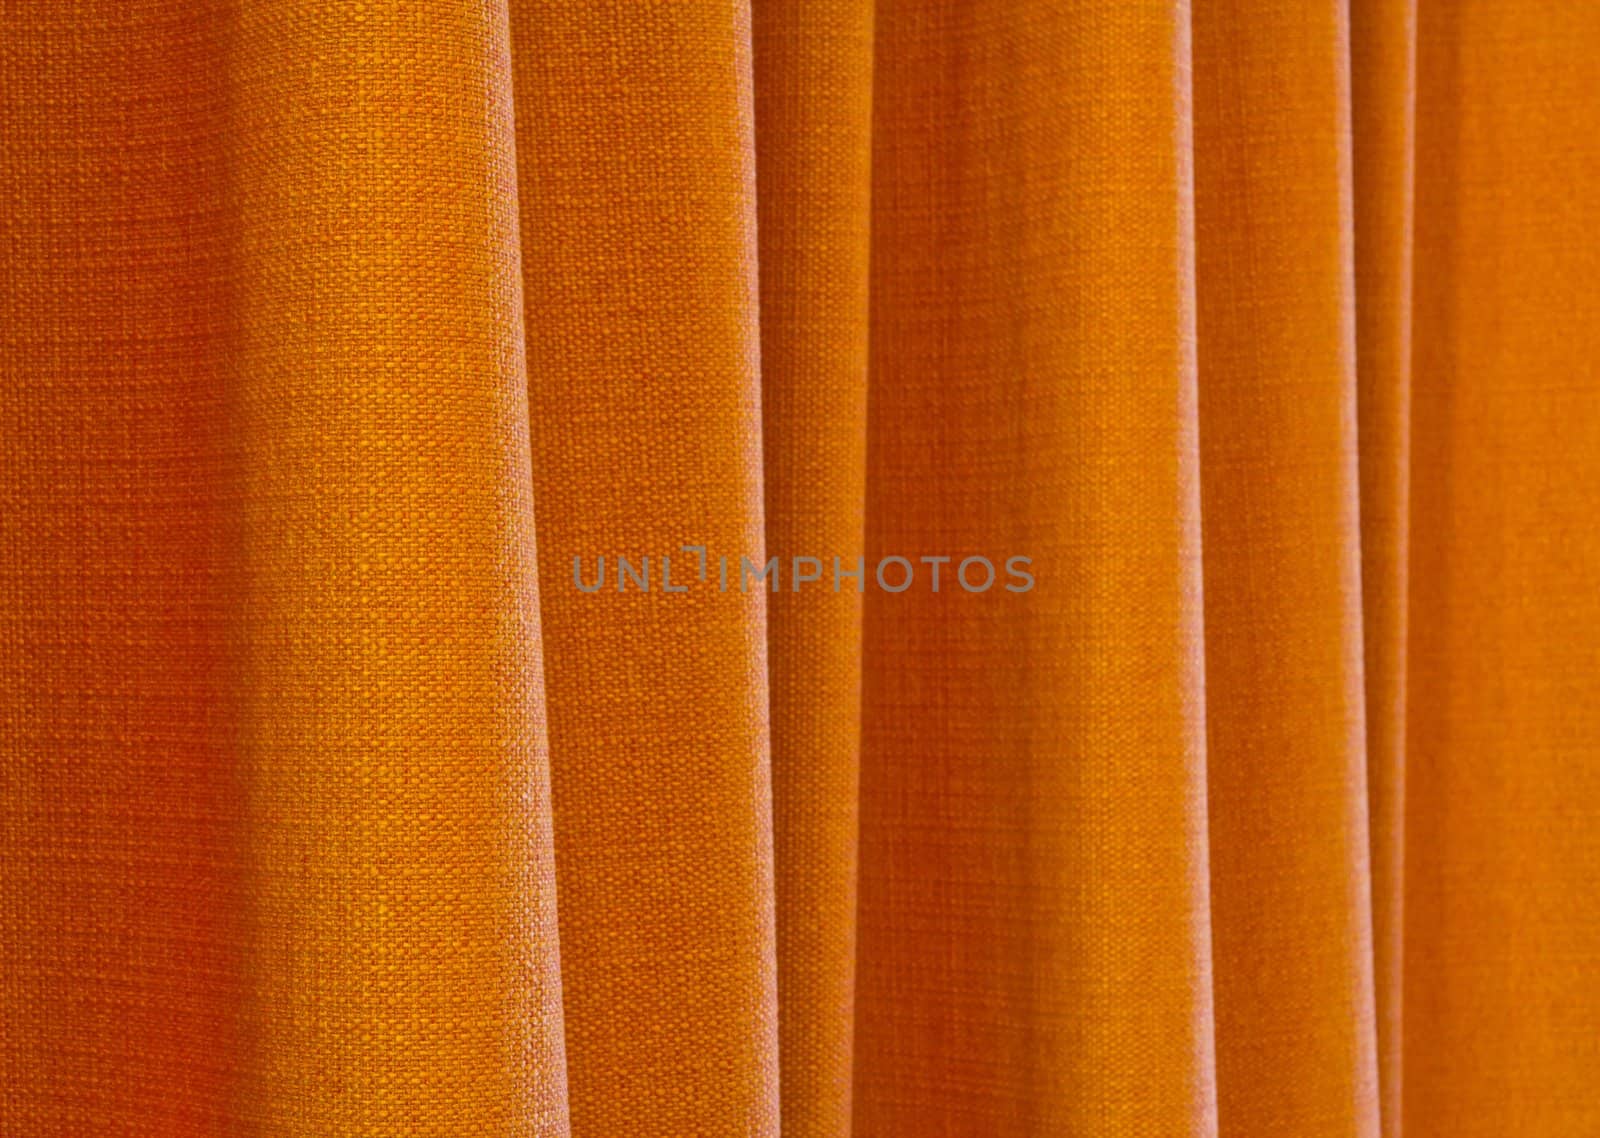 Curtain background